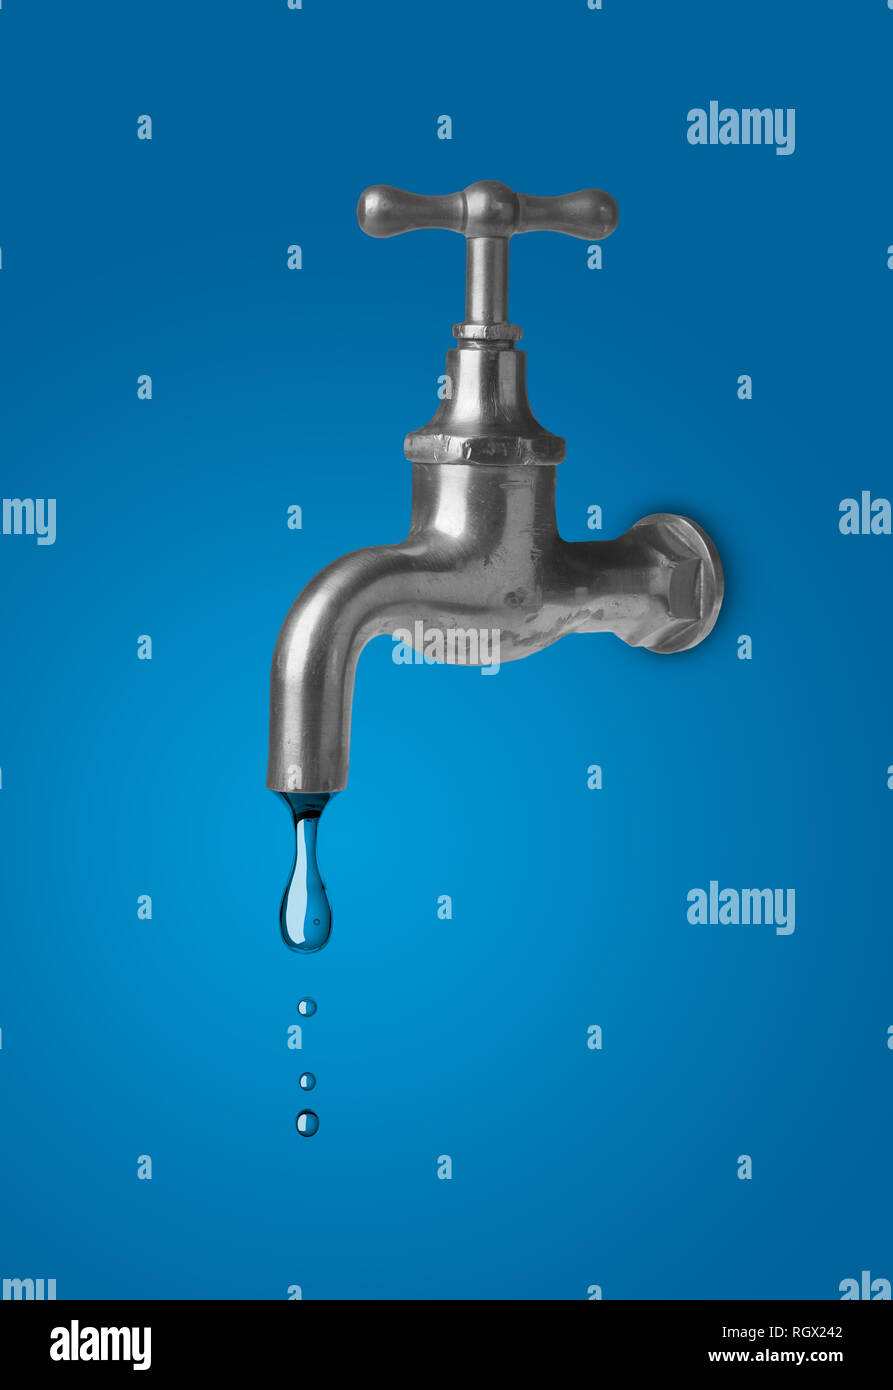 Water Tap Or Faucet Leaking Drop Of Water Water Conservation Or